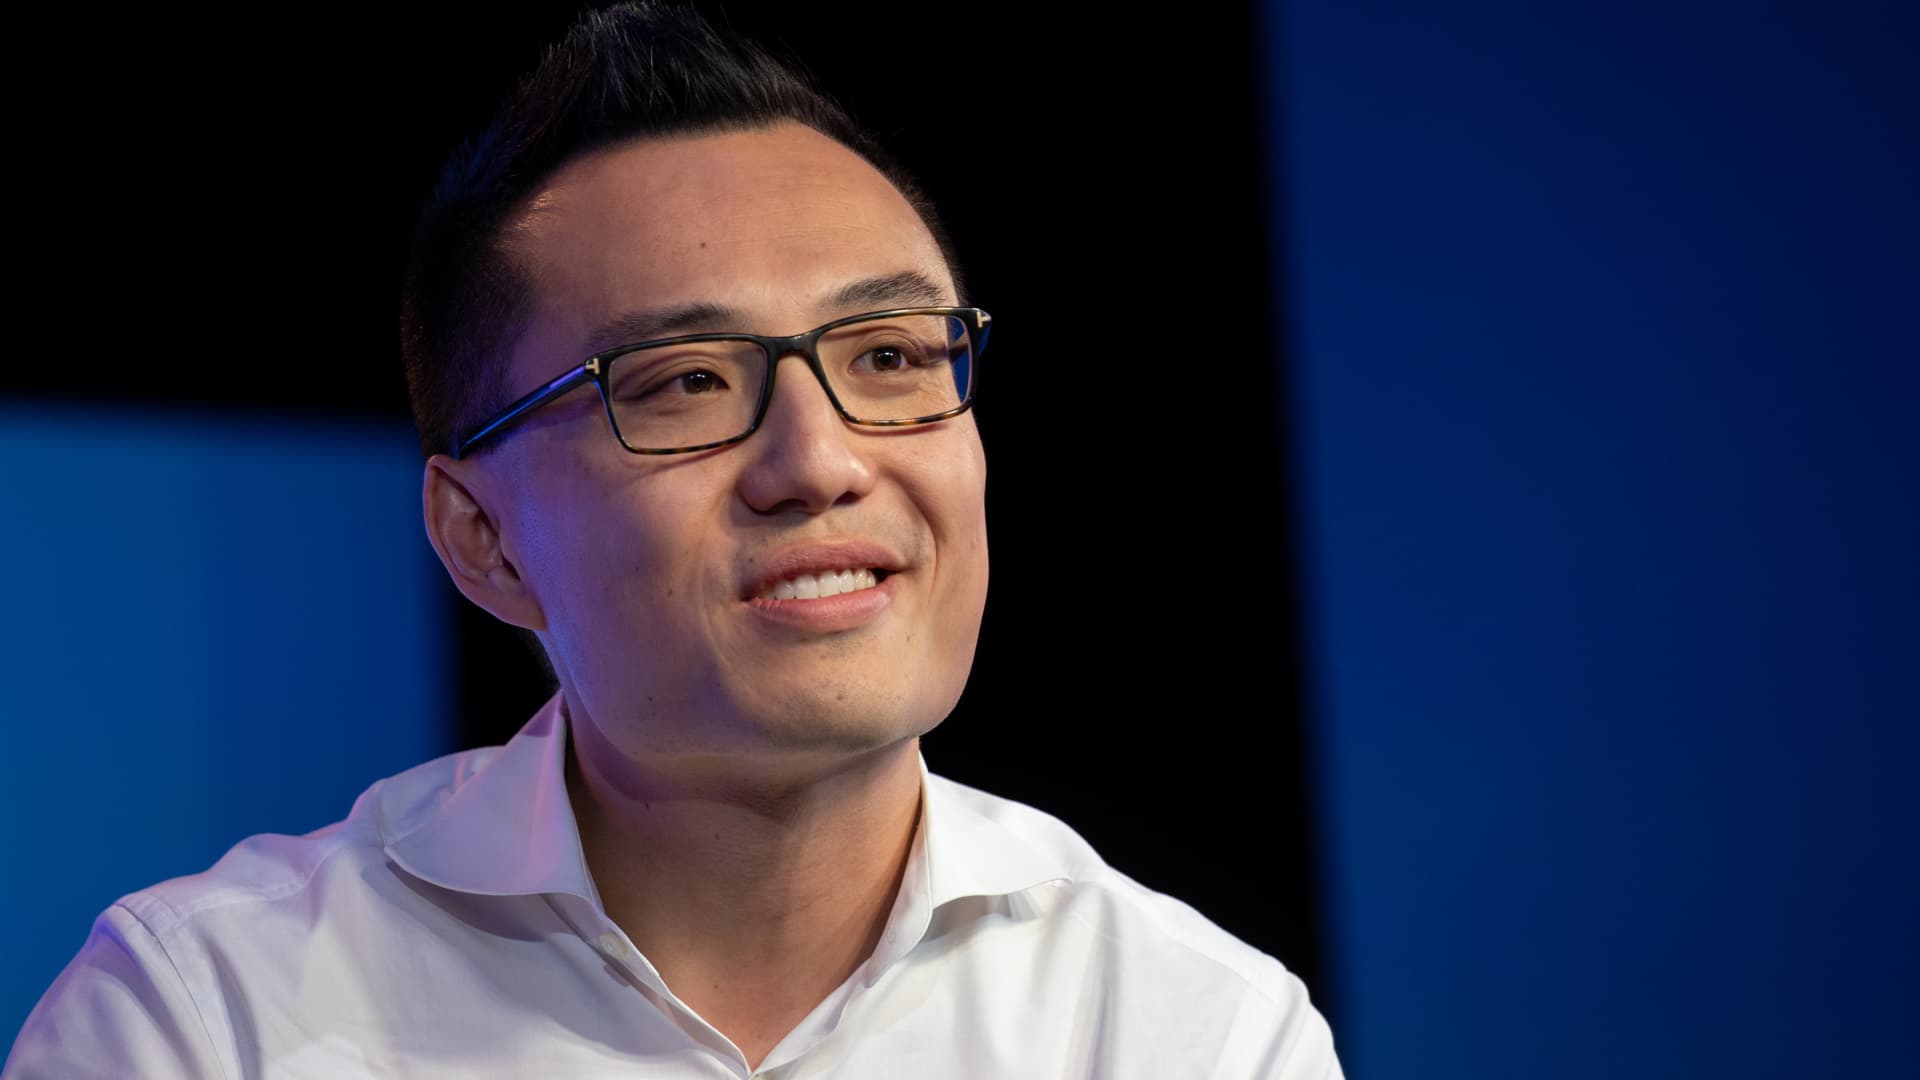 Tony Xu, co-founder and chief executive officer of DoorDash Inc., smiles during the Wall Street Journal Tech Live conference in Laguna Beach, California, U.S., on Tuesday, Oct. 22, 2019.